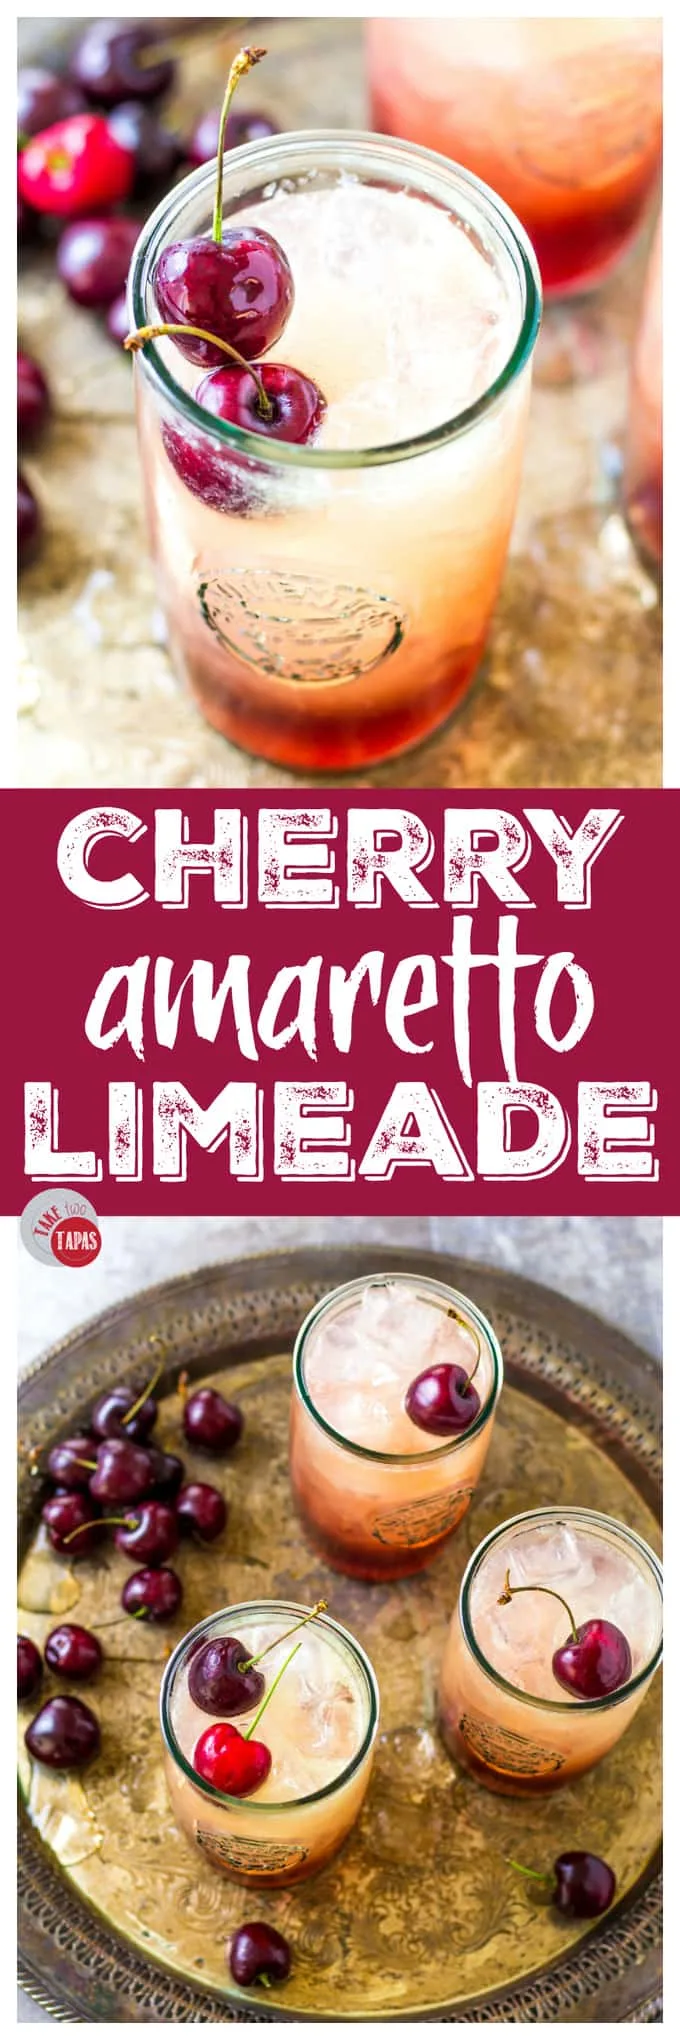 Pinterest collage with text "Cherry Amaretto Limeade"